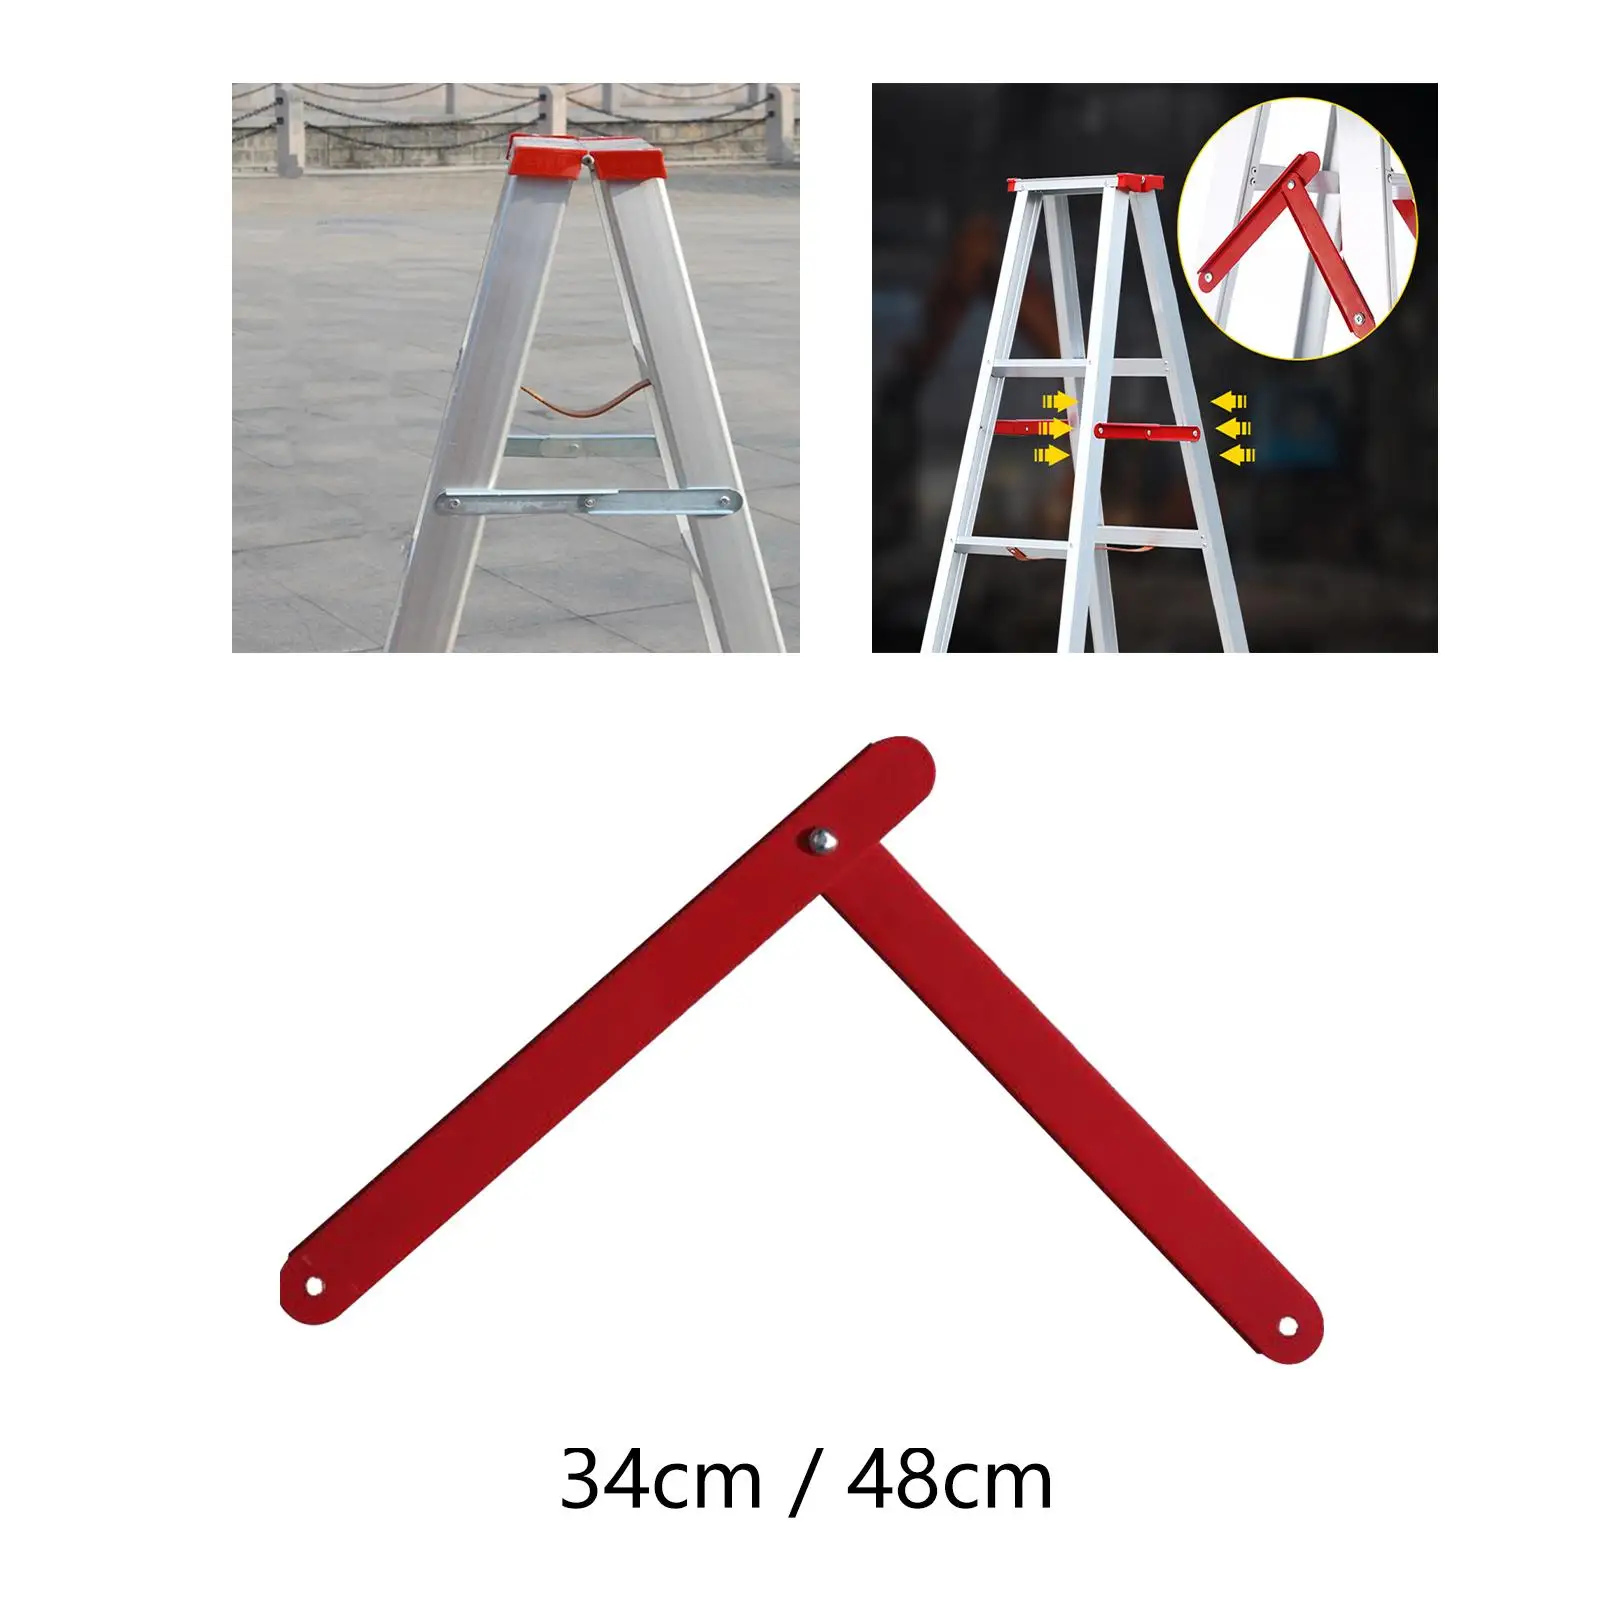 2x Heavy Duty Aluminum Step Ladder Hinge Reinforced Tie Rod Attachment Fixed Support Metal Locator for Folding Step Accessories